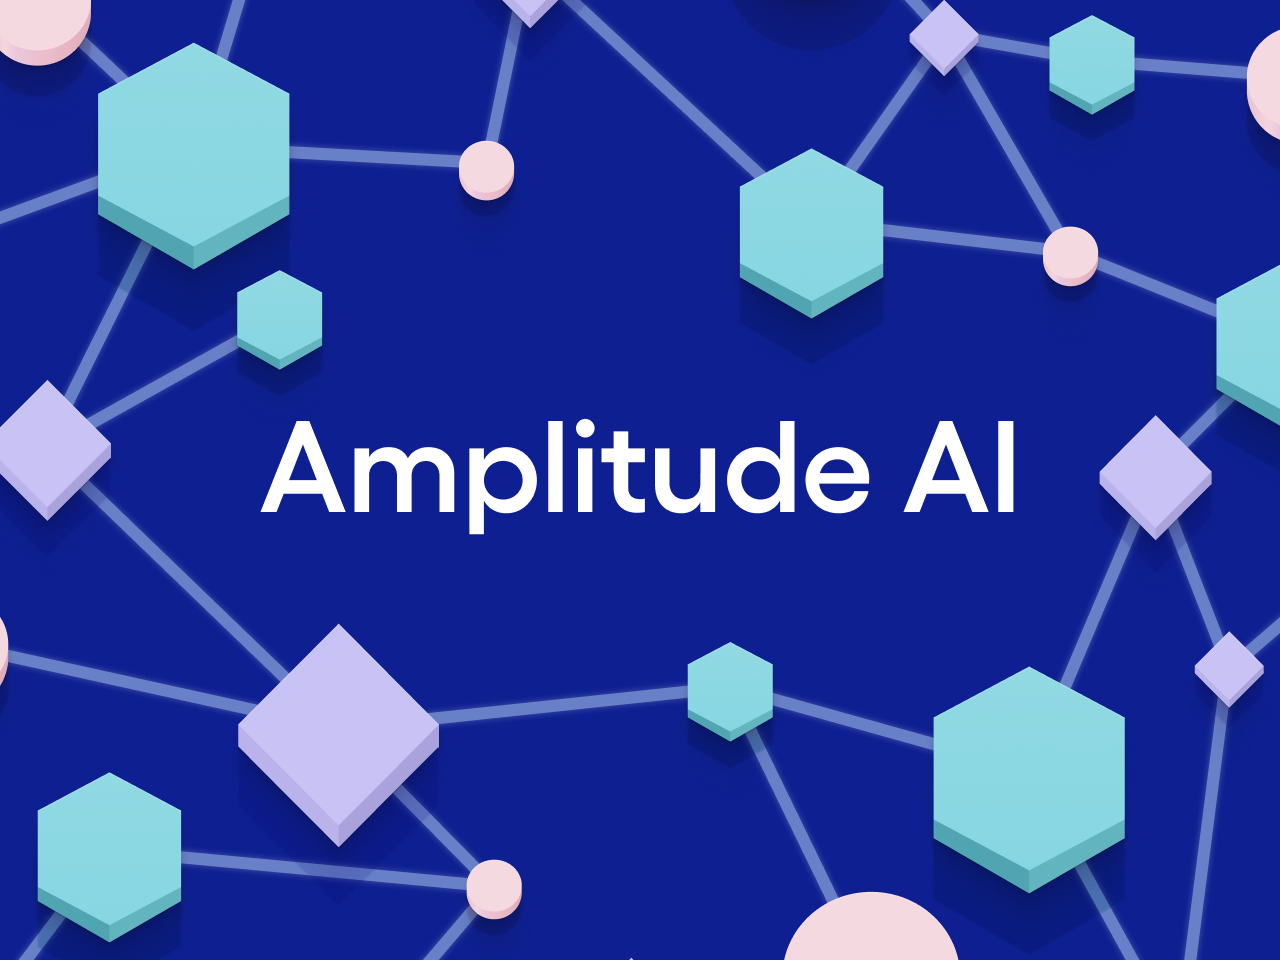 A geometric 3D shapes in Amplitude colors on a blue-background with white text indicating Amplitude AI